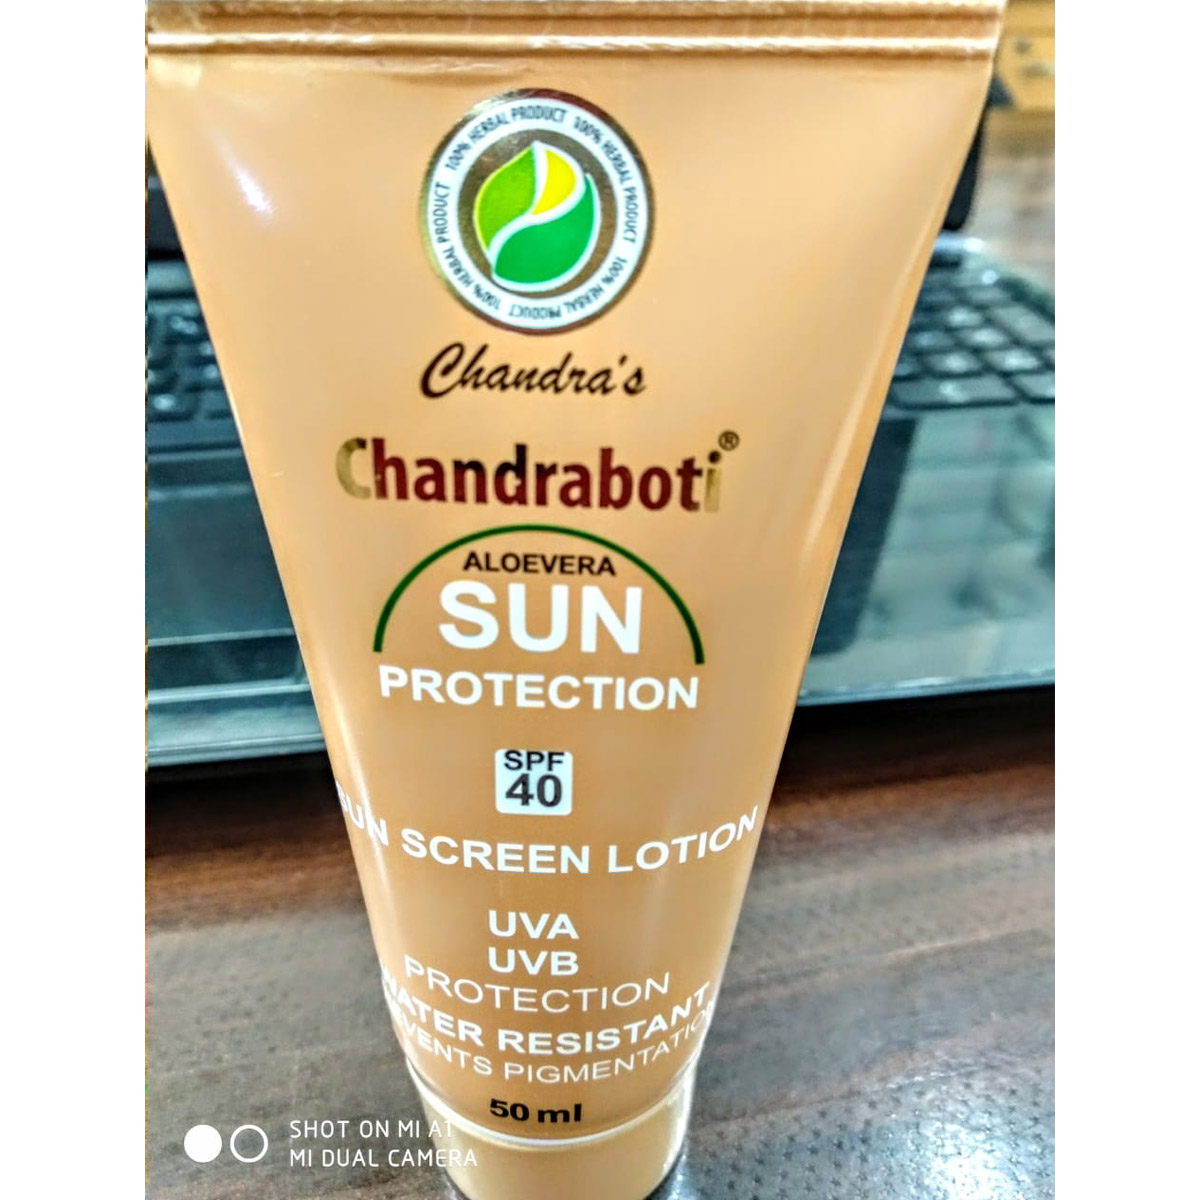 Bengal Shopping - One Life to Live - One Store to Shop | Chandraboti  Aloevera Sun Protection SPF 40 Sun Screen Lotion